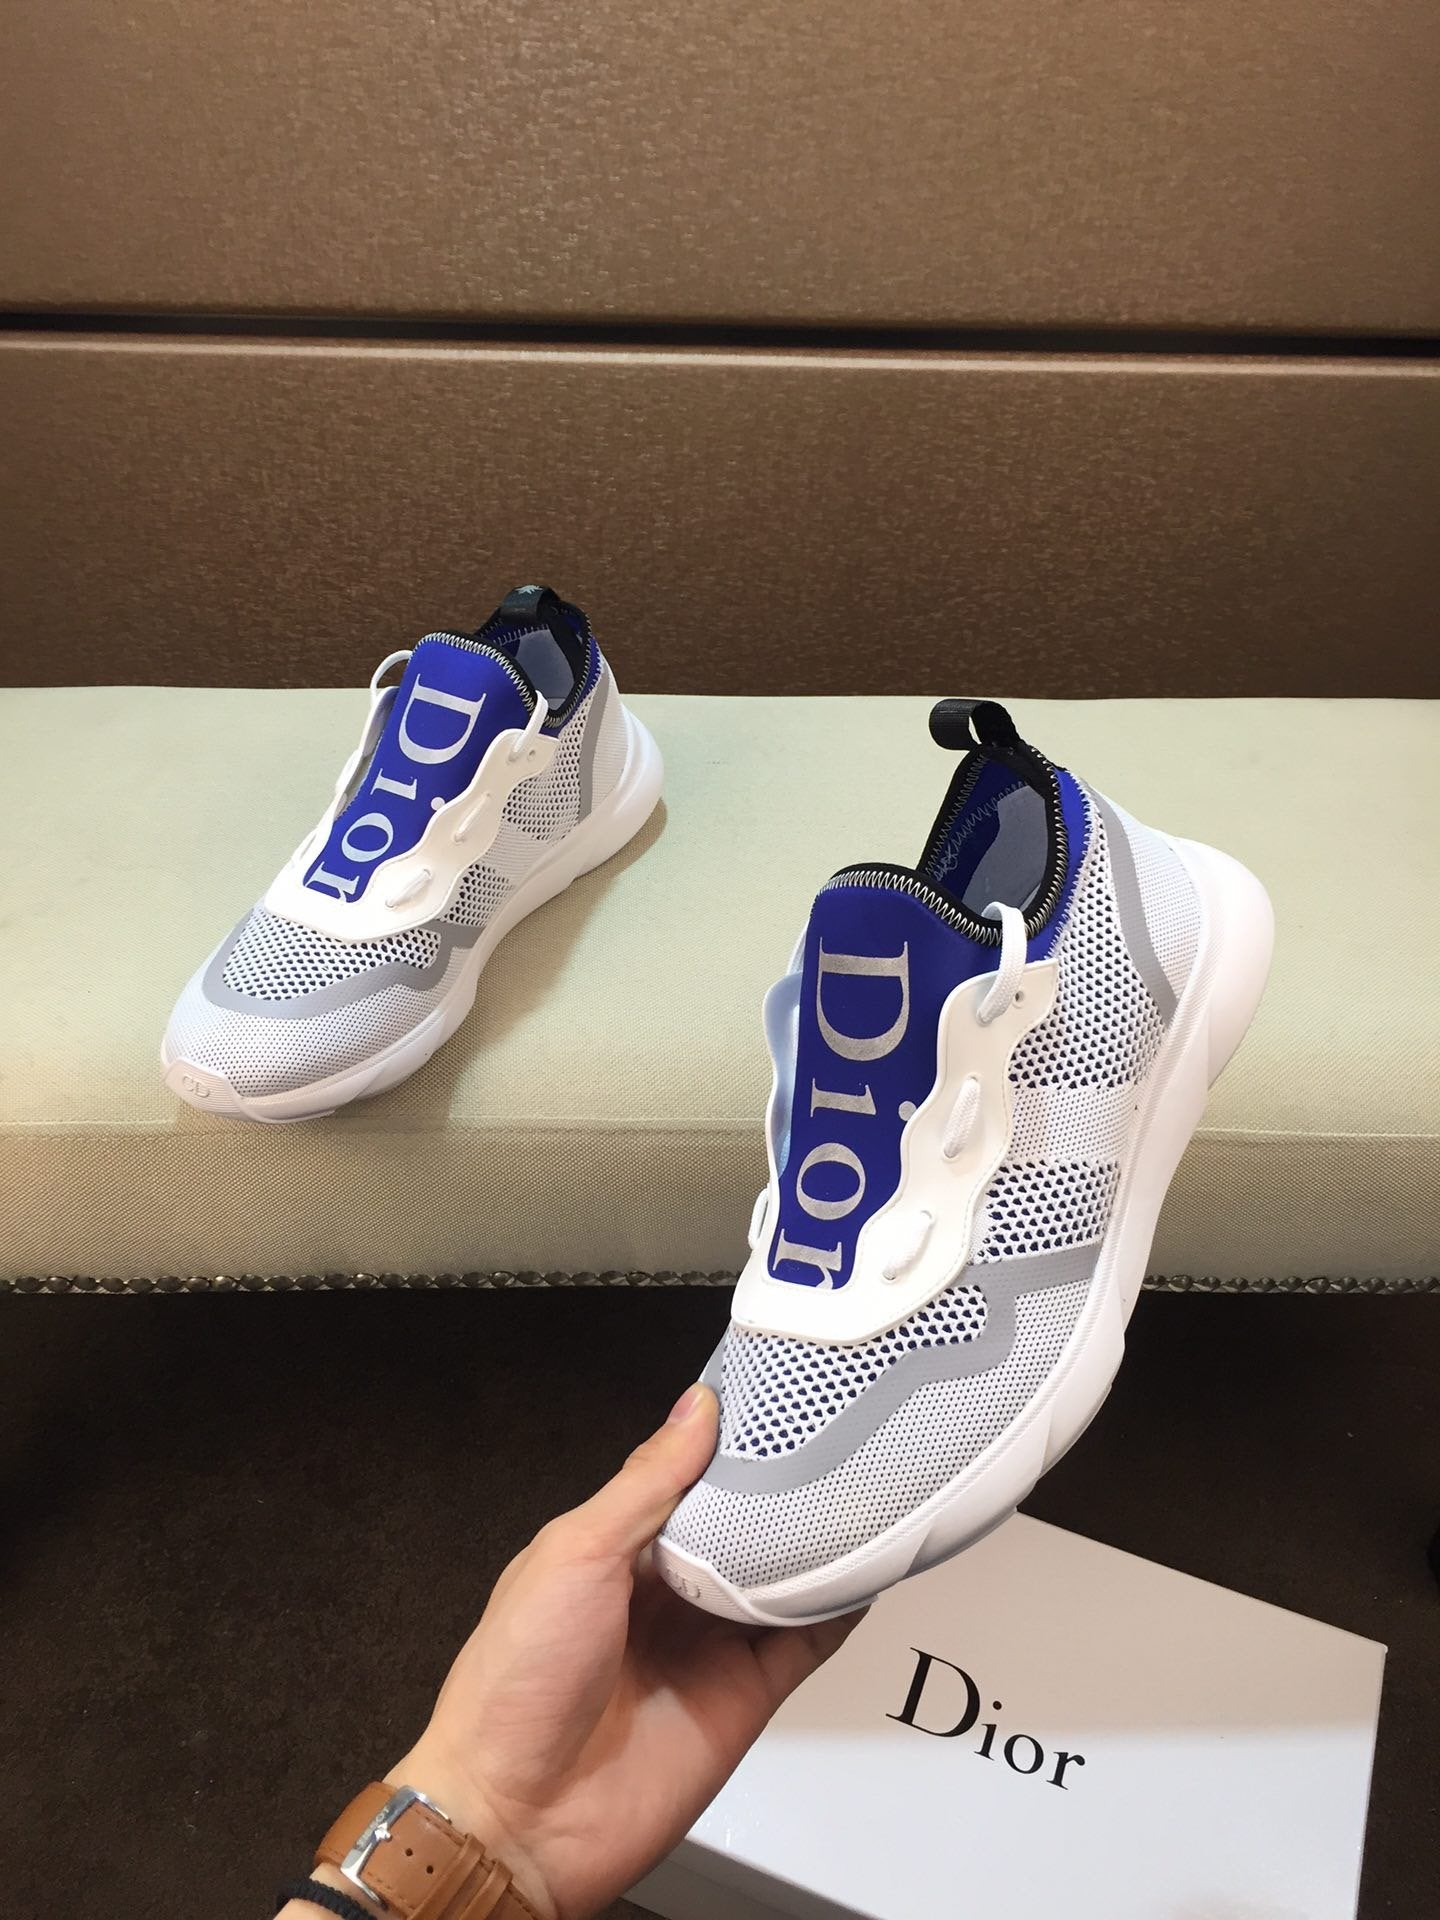 Dior Men's Leather Fashion Low Top Sneakers Shoes